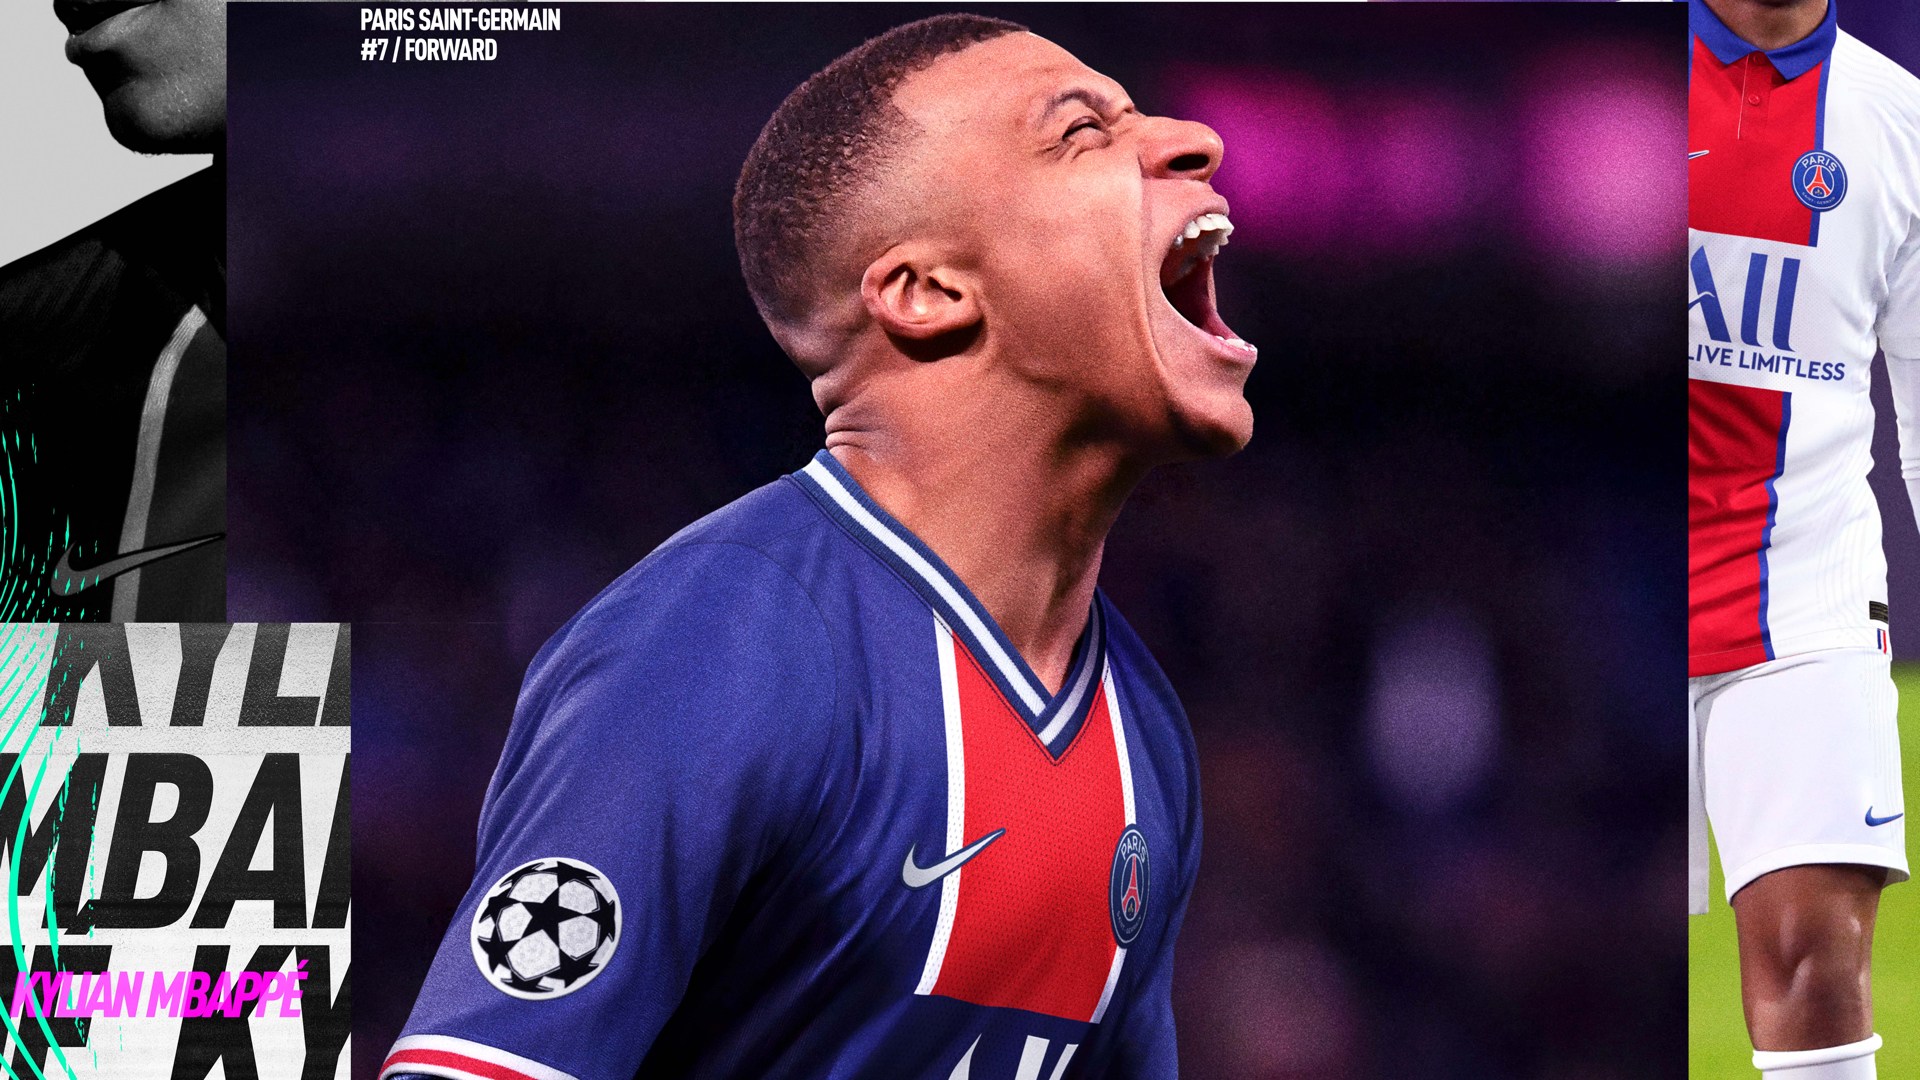 FIFA 21 Gets Two Sharp Screenshots For Upcoming PS5 And Xbox Series X/S Releases